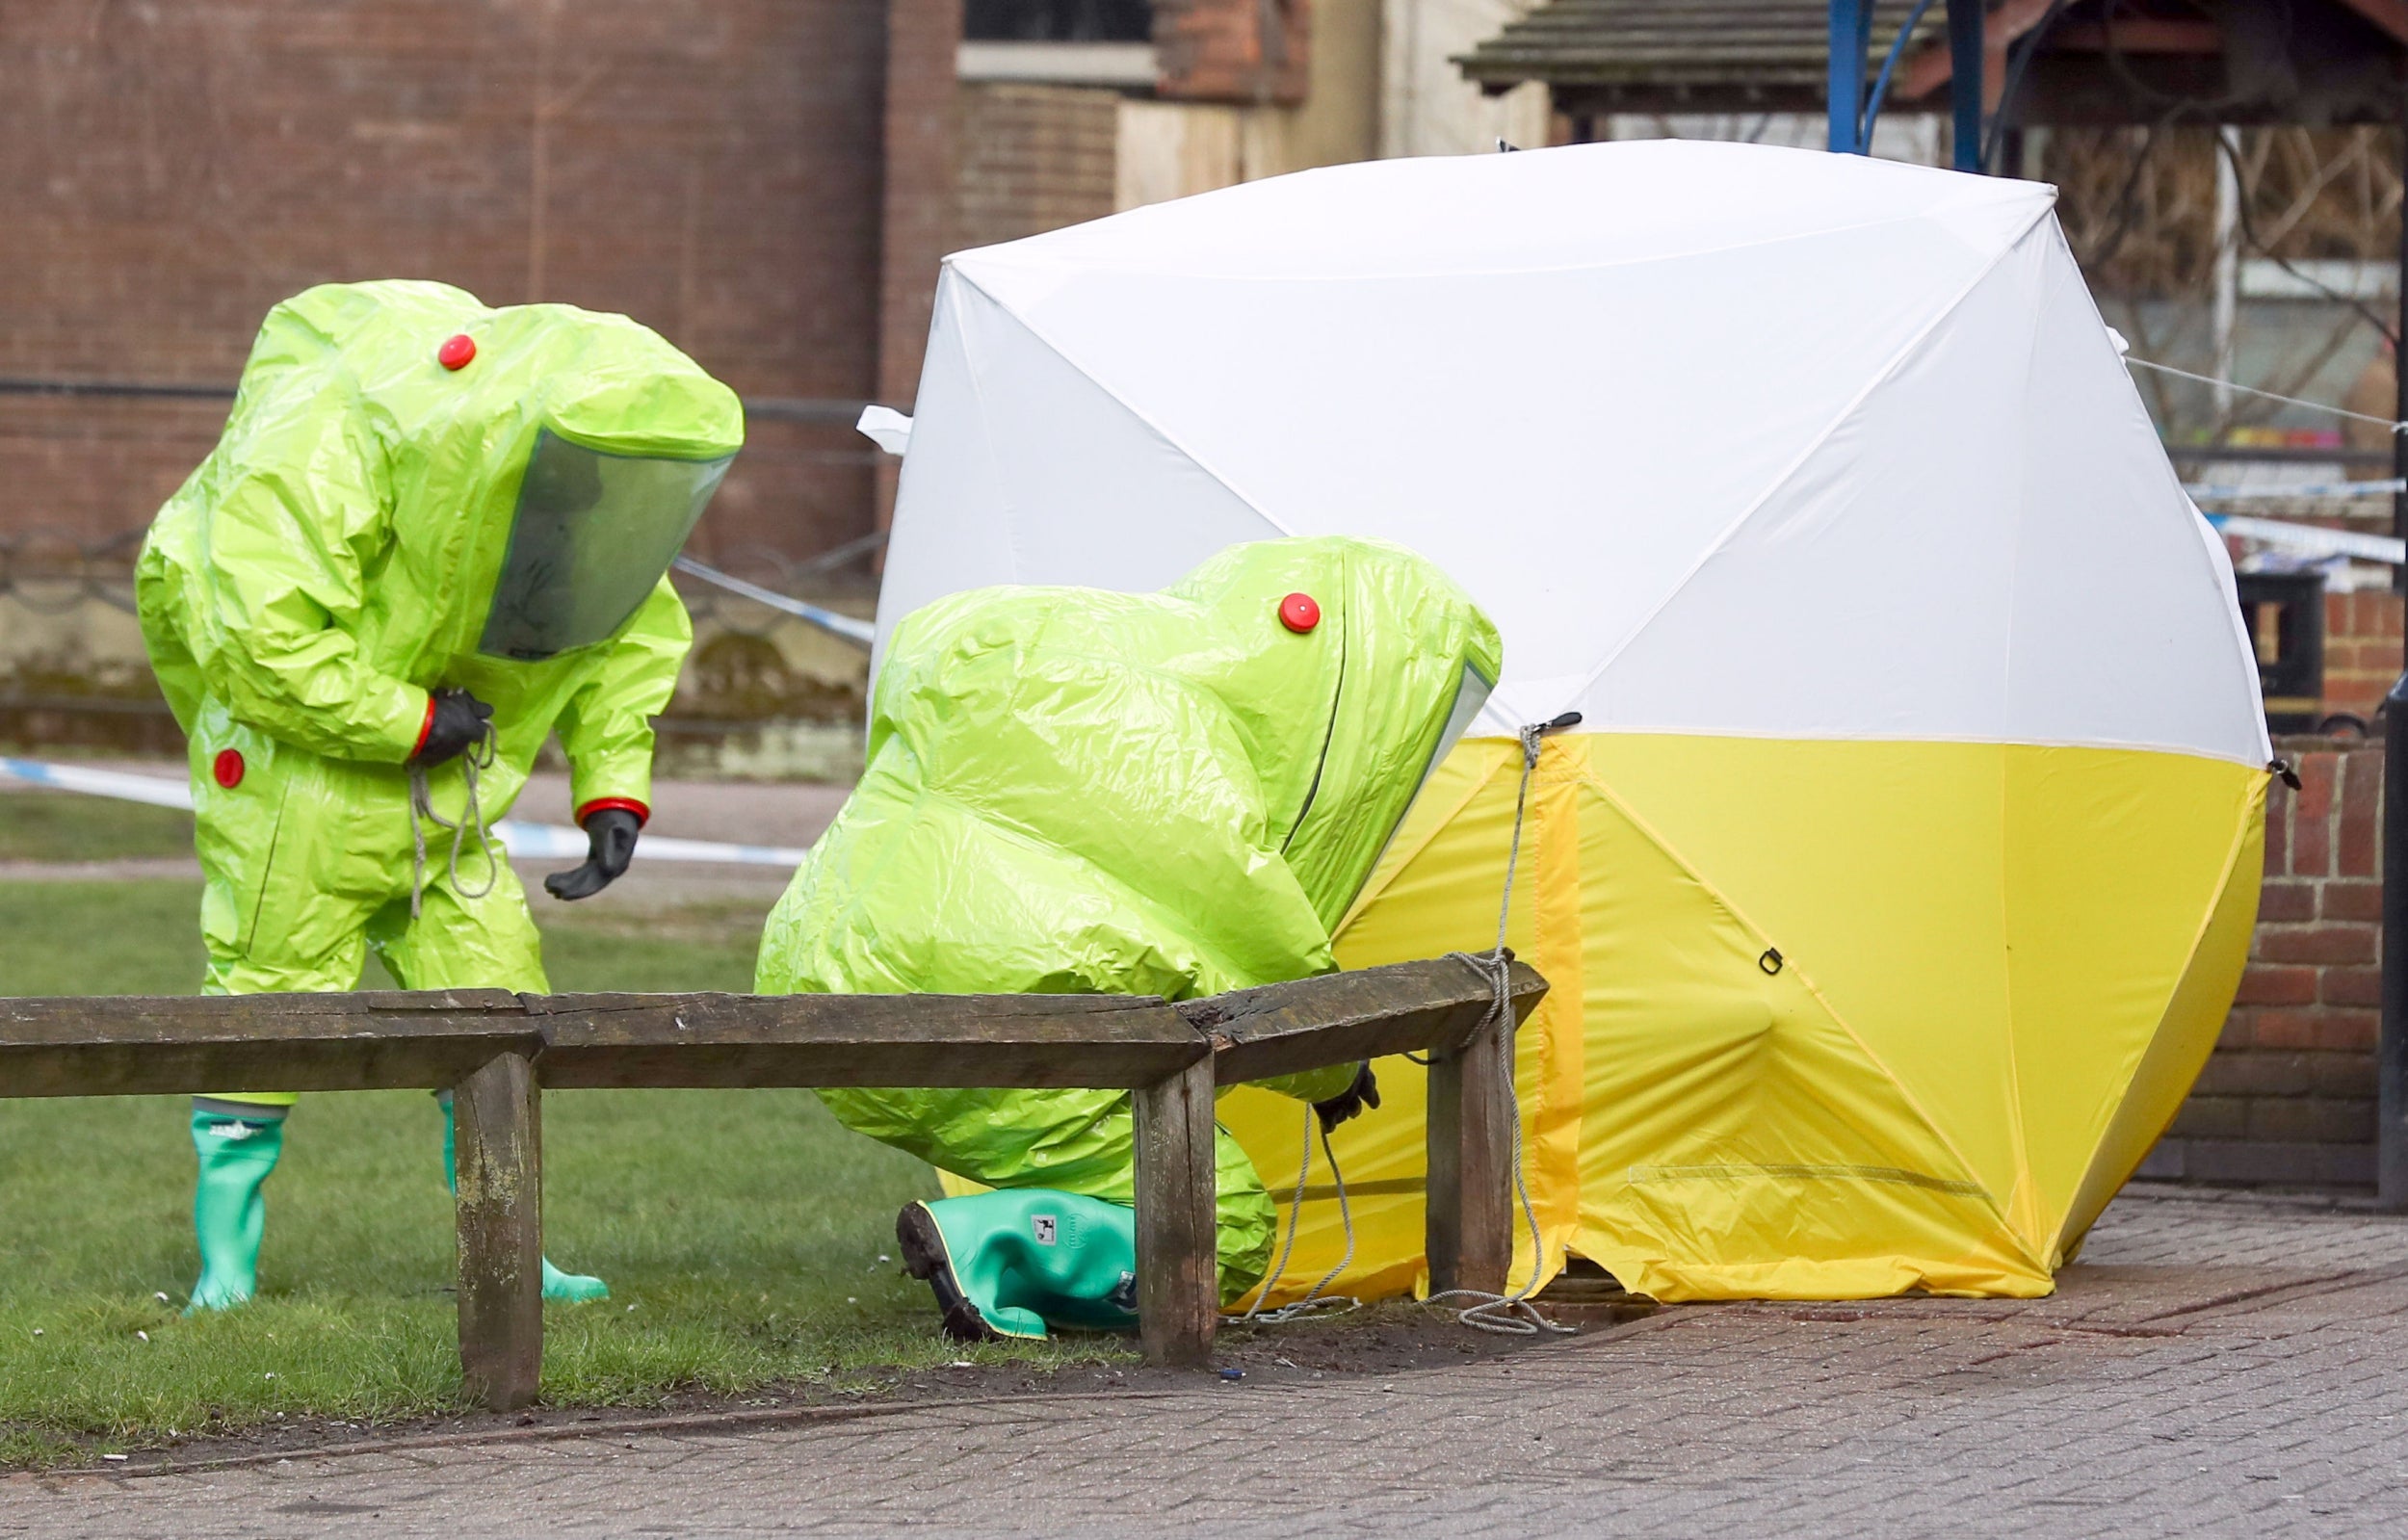 Officials in hazmat suits investigate the poisoning of Russian spy Sergei Skripal and his daughter Yulia